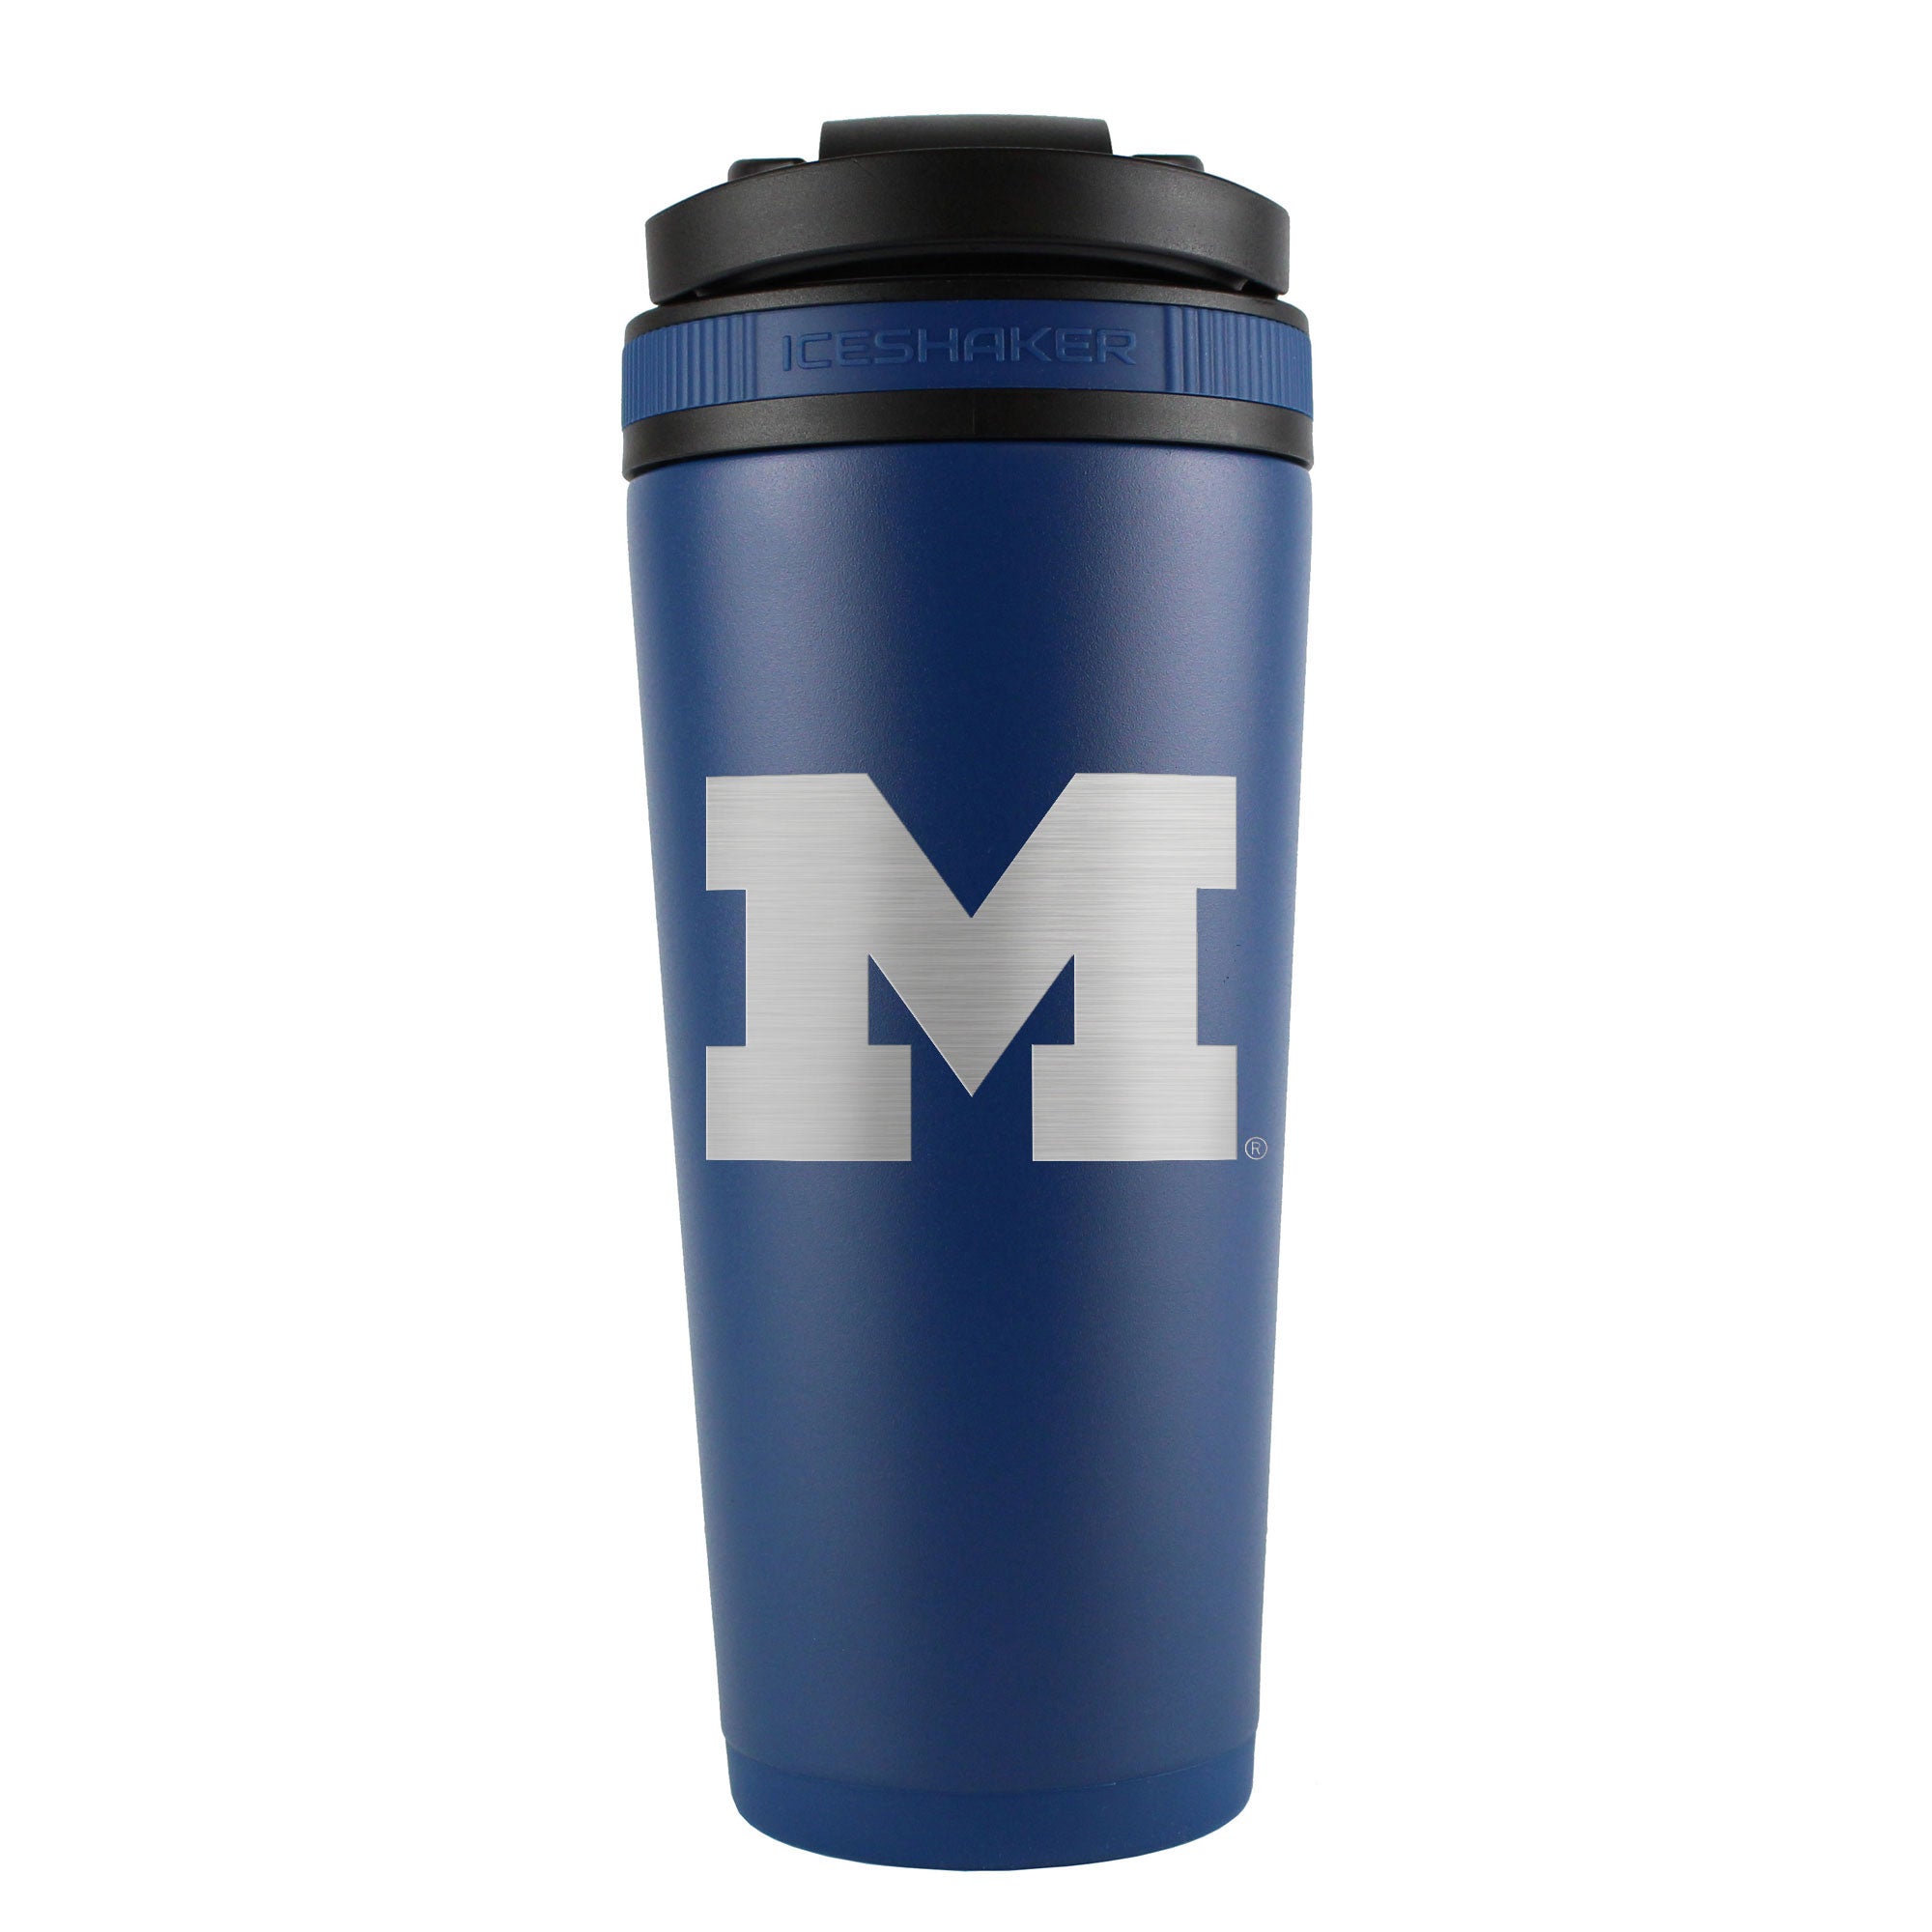 Officially Licensed University of Michigan 26oz Ice Shaker - Navy